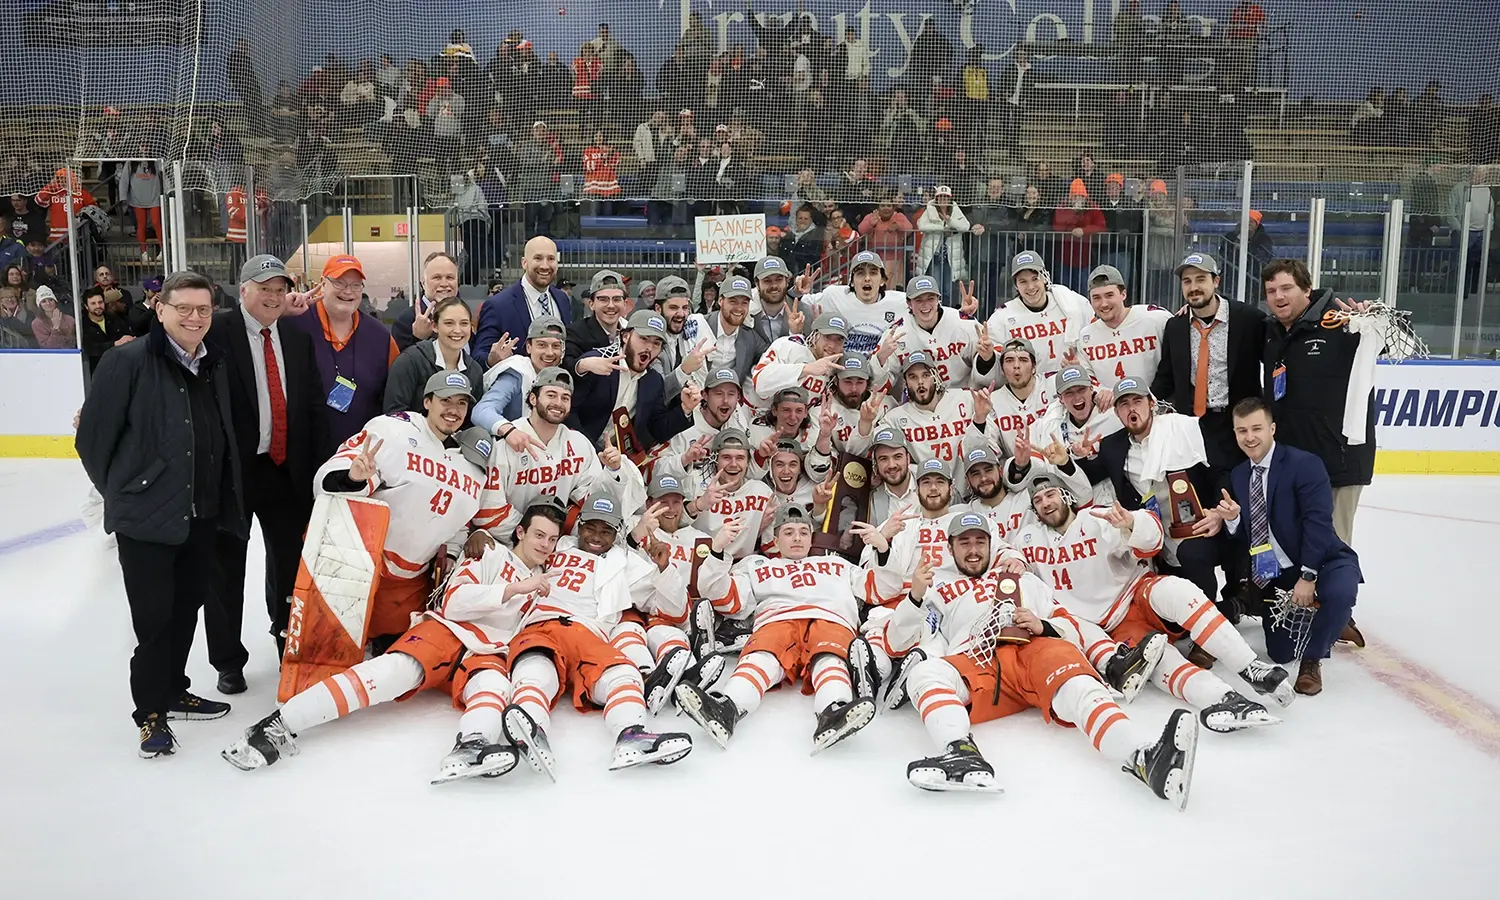 This week, we feature photos of our Herons and Statesmen student-athletes in action during the last academic year. Here, the Hobart hockey team poses after winning a second consecutive NCAA Division III national championship.